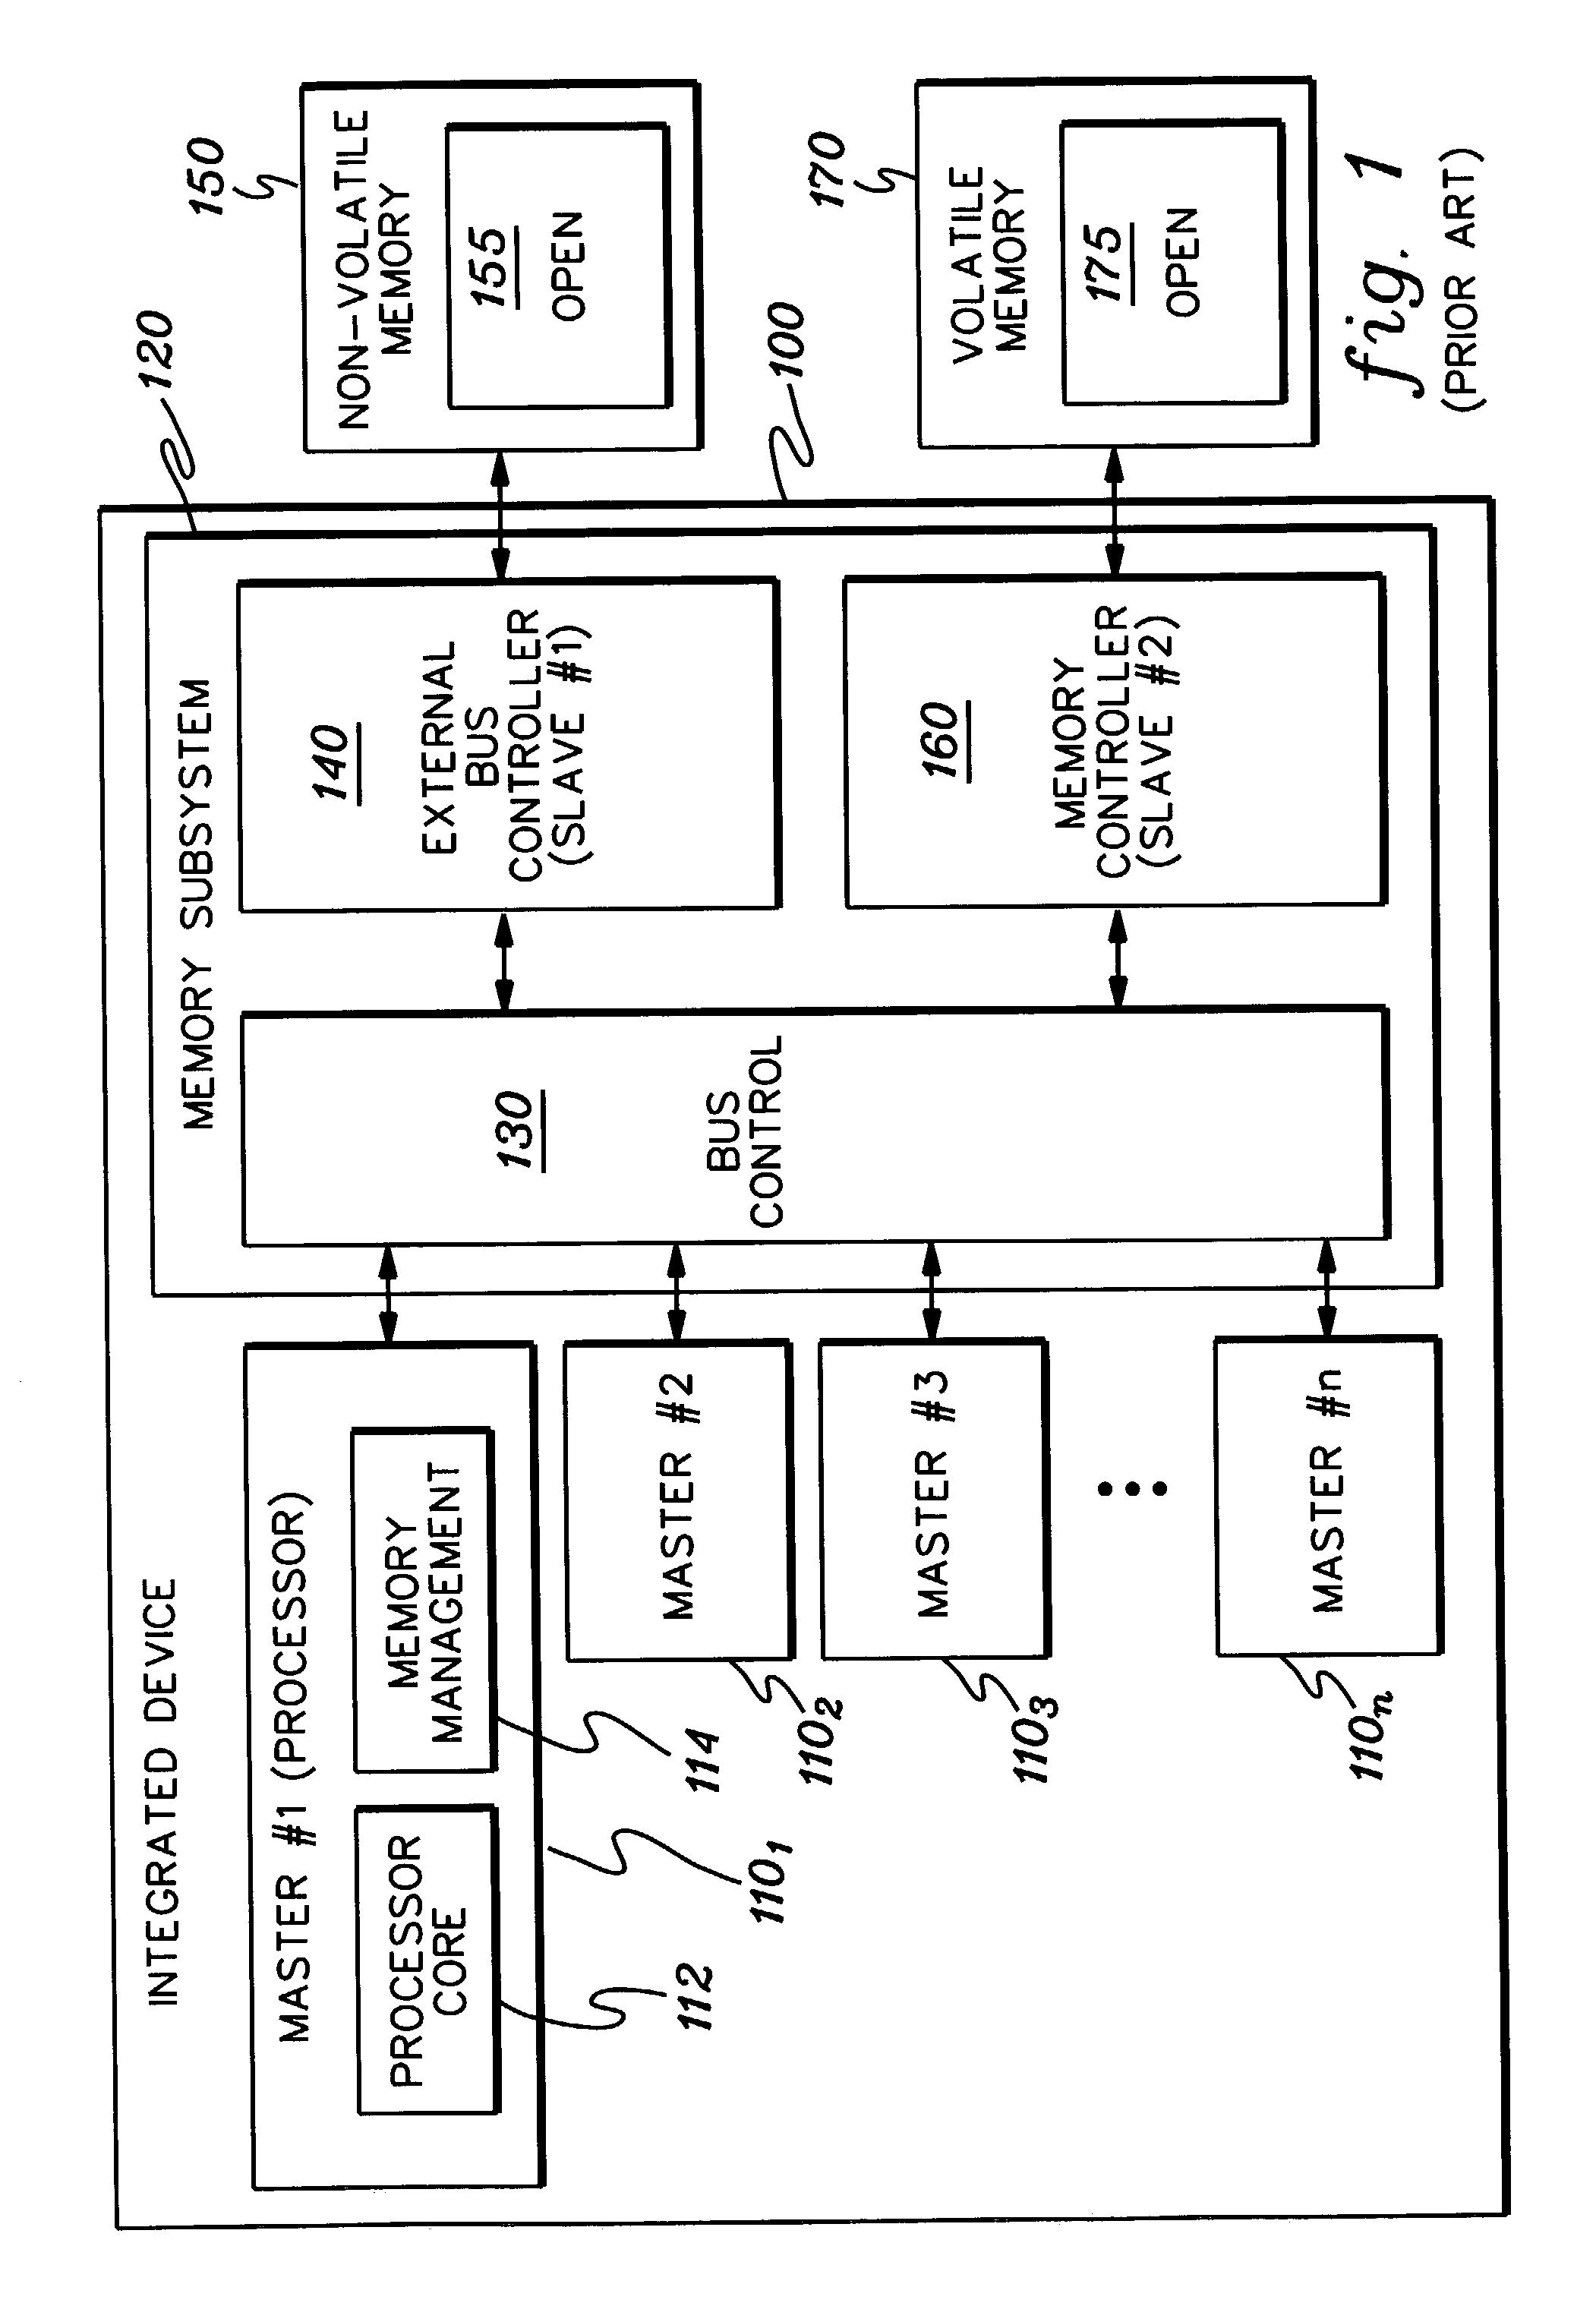 Control function with multiple security states for facilitating secure operation of an integrated system